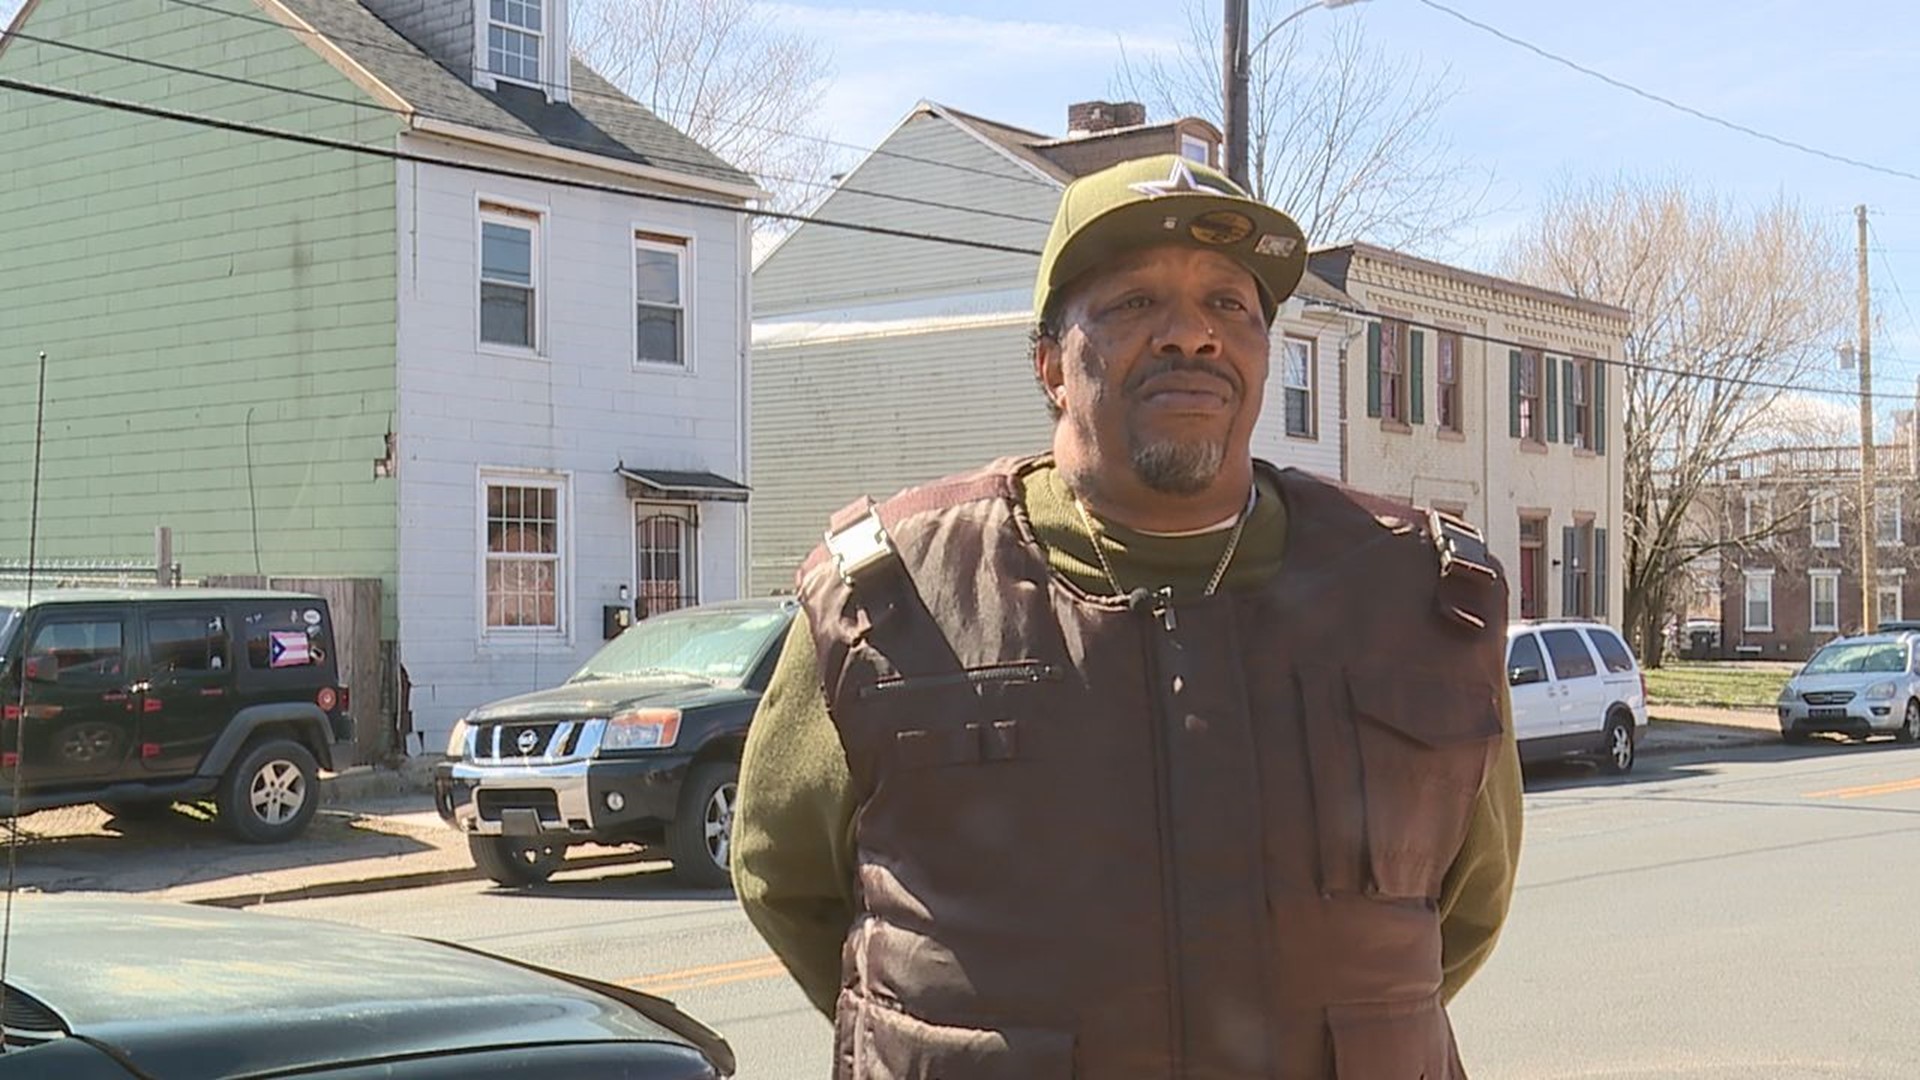 After a recent string of violent crime, two men are working to make a difference in the city.